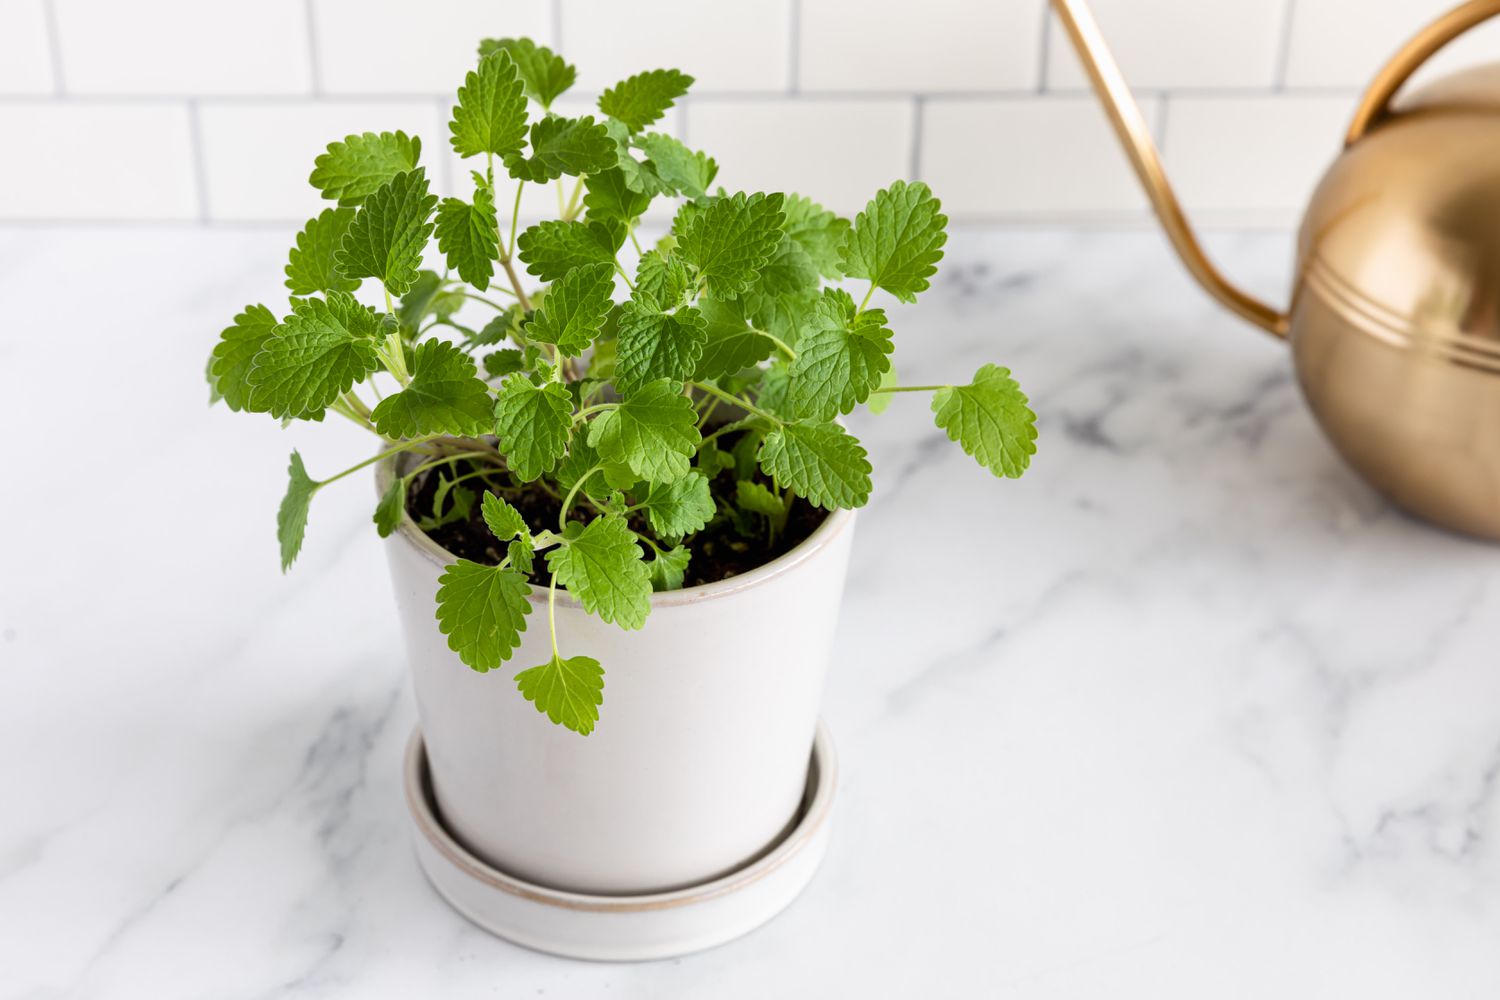 Catnip 12 Plants Safe For Cats With pictures [Indoor and Outdoor and Low Light]